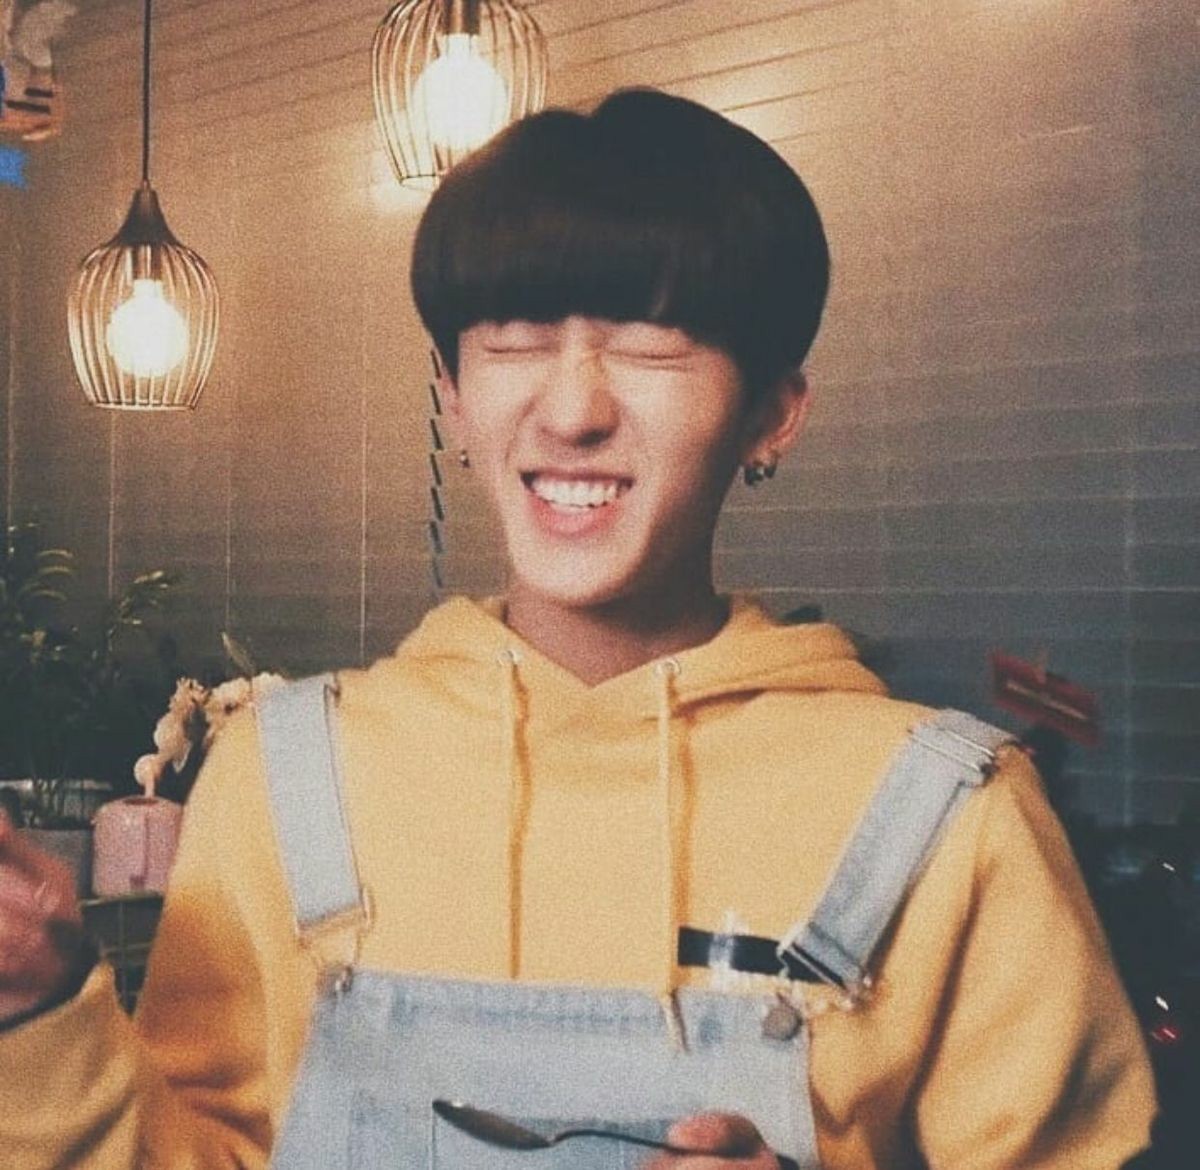 End of thread!! Hope you liked it, hope this reaches him. Let's amplify our voices all together so he can feel extra loved today.Thank you for reading. It'll mean a lot if you could like it and share it. Have a lovely  #ChangbinWeek everyone 